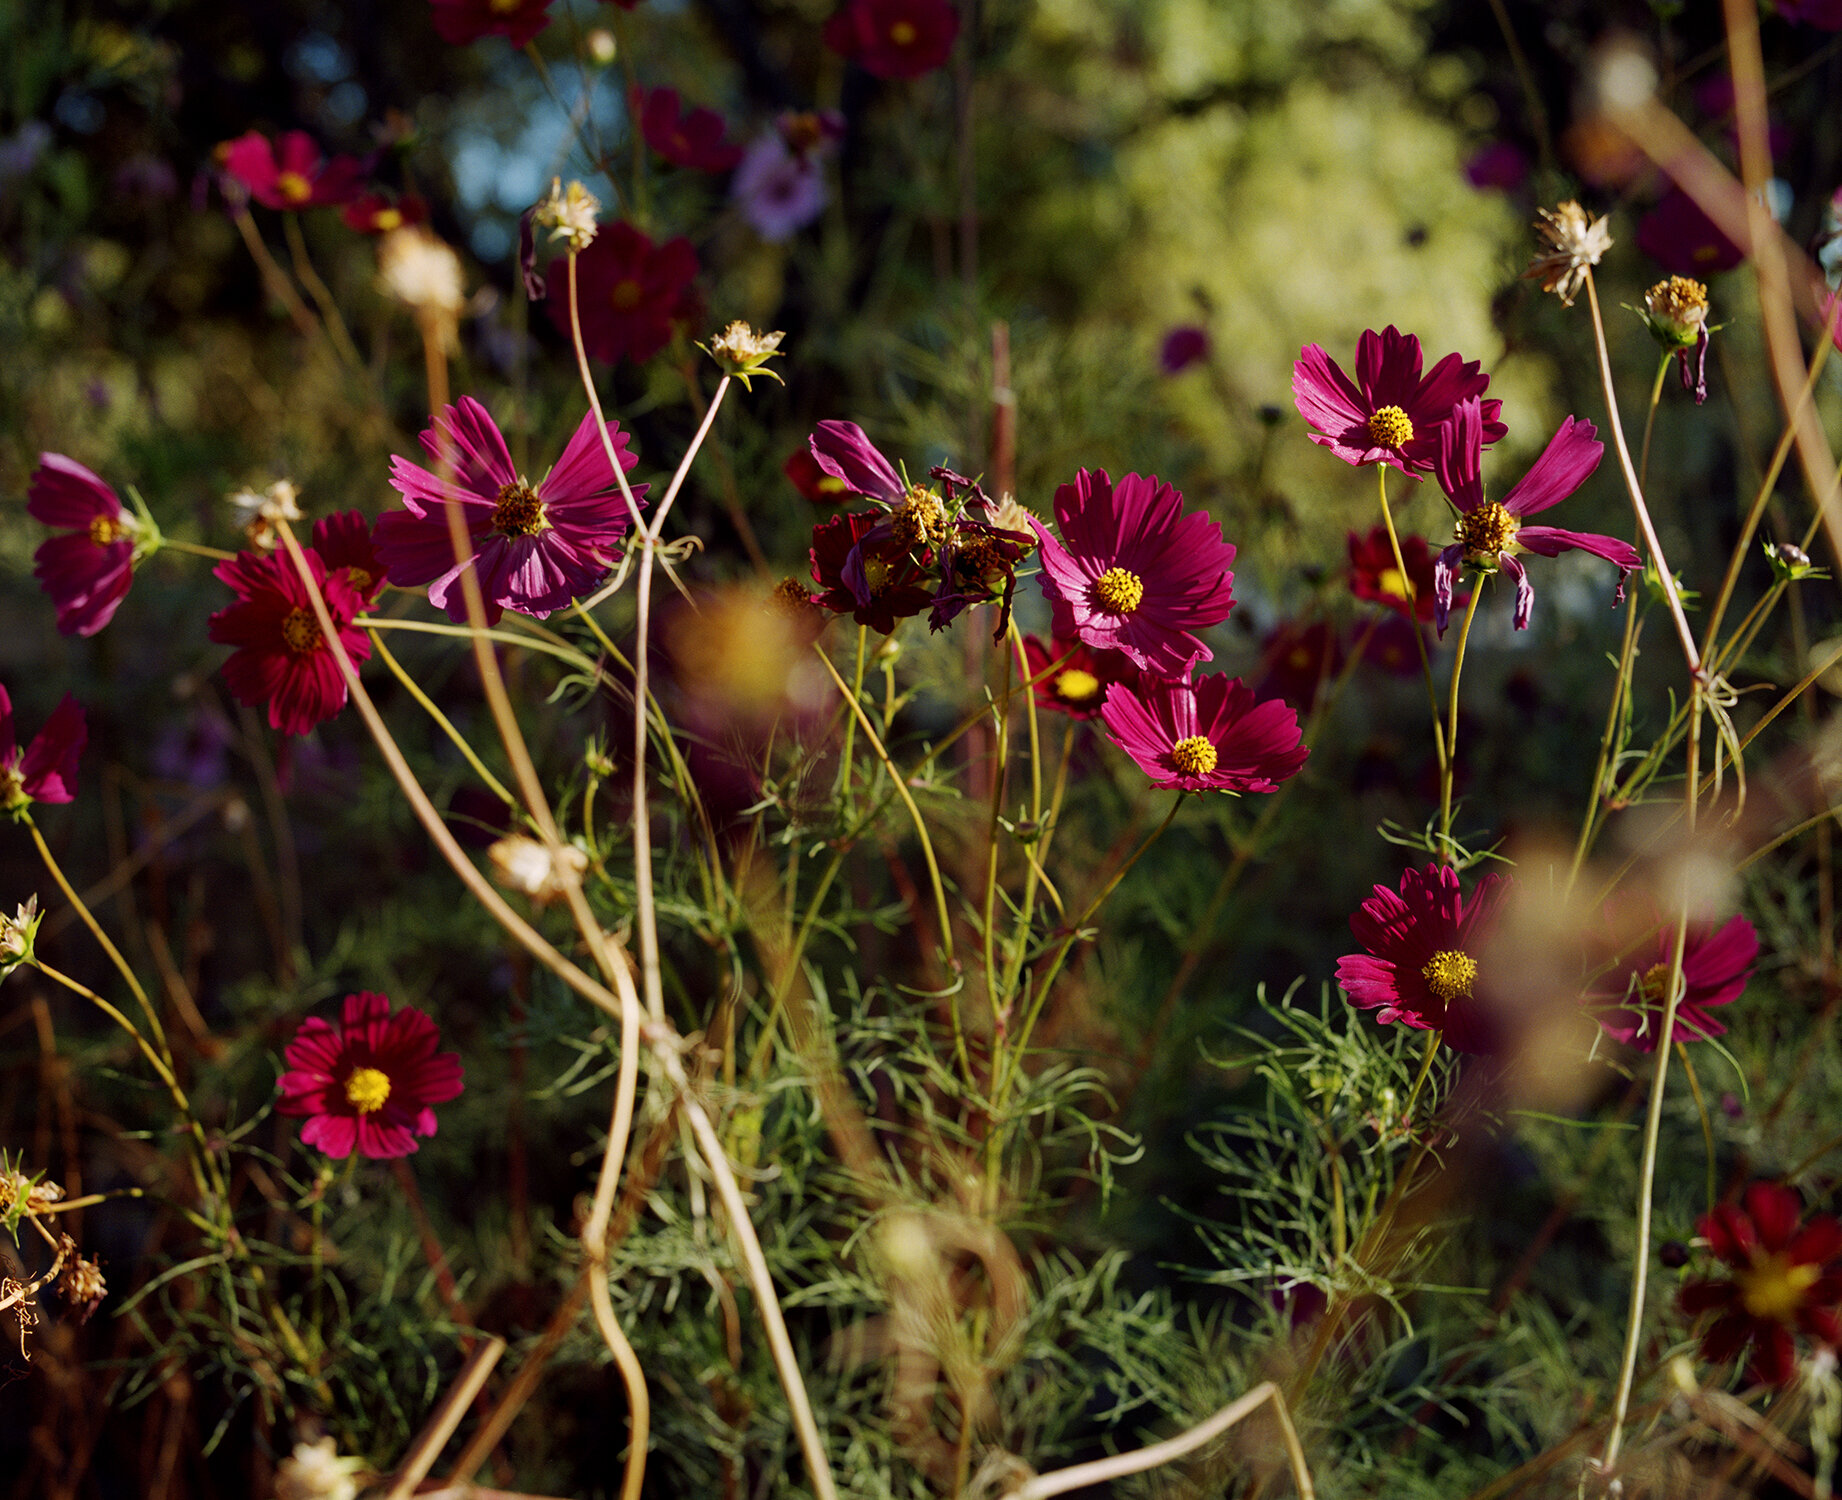  The Jaftha Farm  This image of the burgundy “Cosmos” bouncing in the breeze, with the central flower dying, was taken at the Jaftha flower farm, the only remaining flower farm of its kind in Constantia. After being evicted from Constantia to Parkwoo